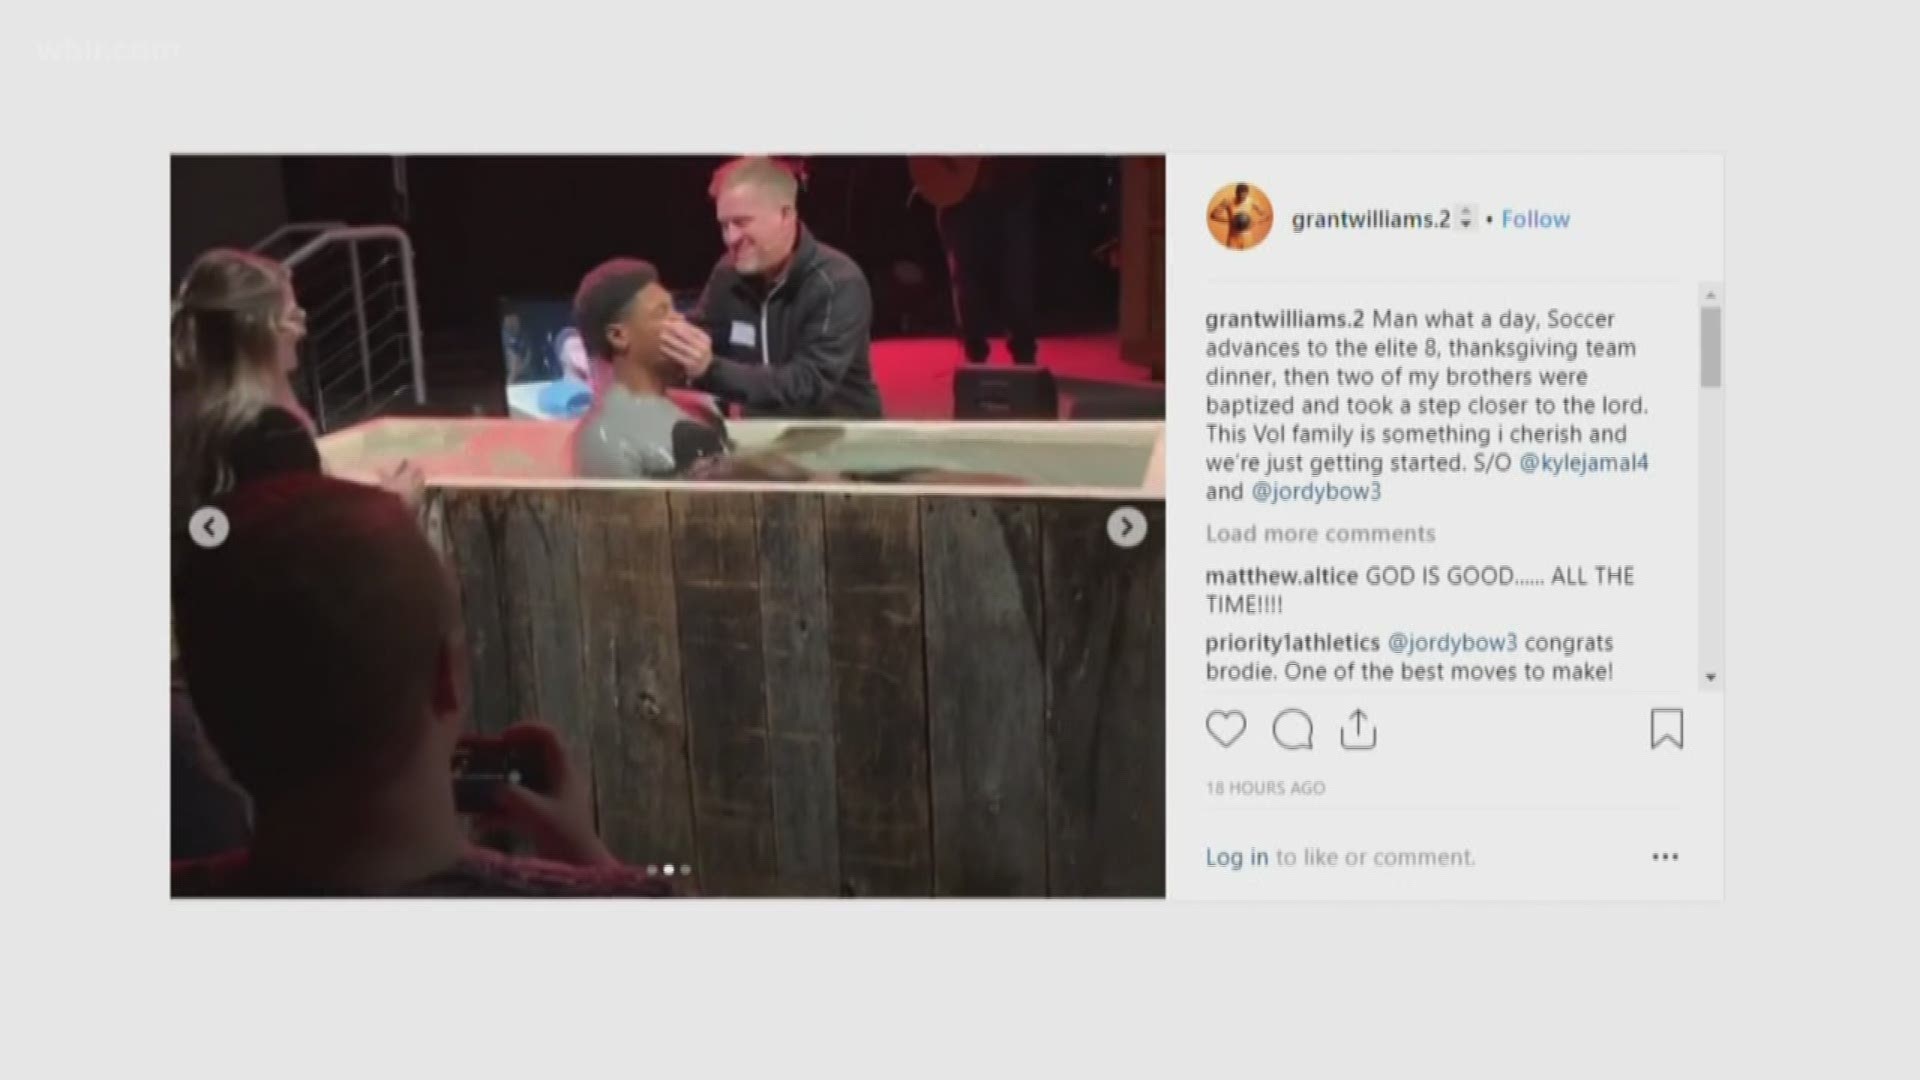 Grant Williams shared a video on Instagram of teammates Kyle Alexander and Jordan Bowden getting baptized.